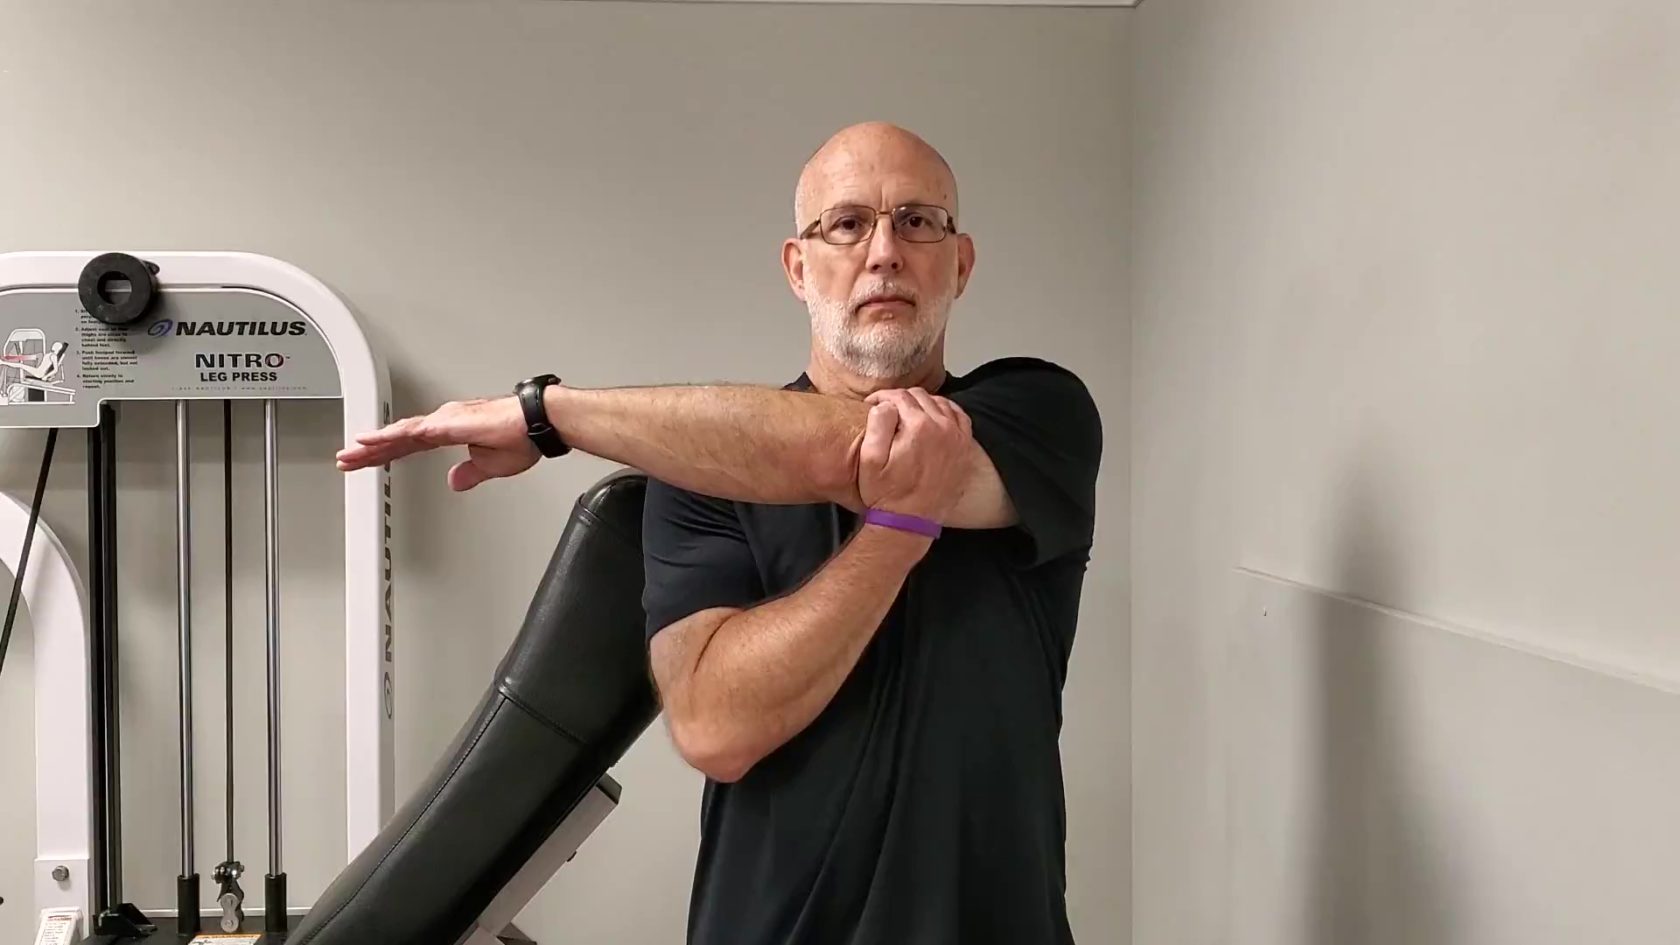 Over 50 Fitness - Dave Durell from Strength After 50 demonstrates a shoulder stretch.